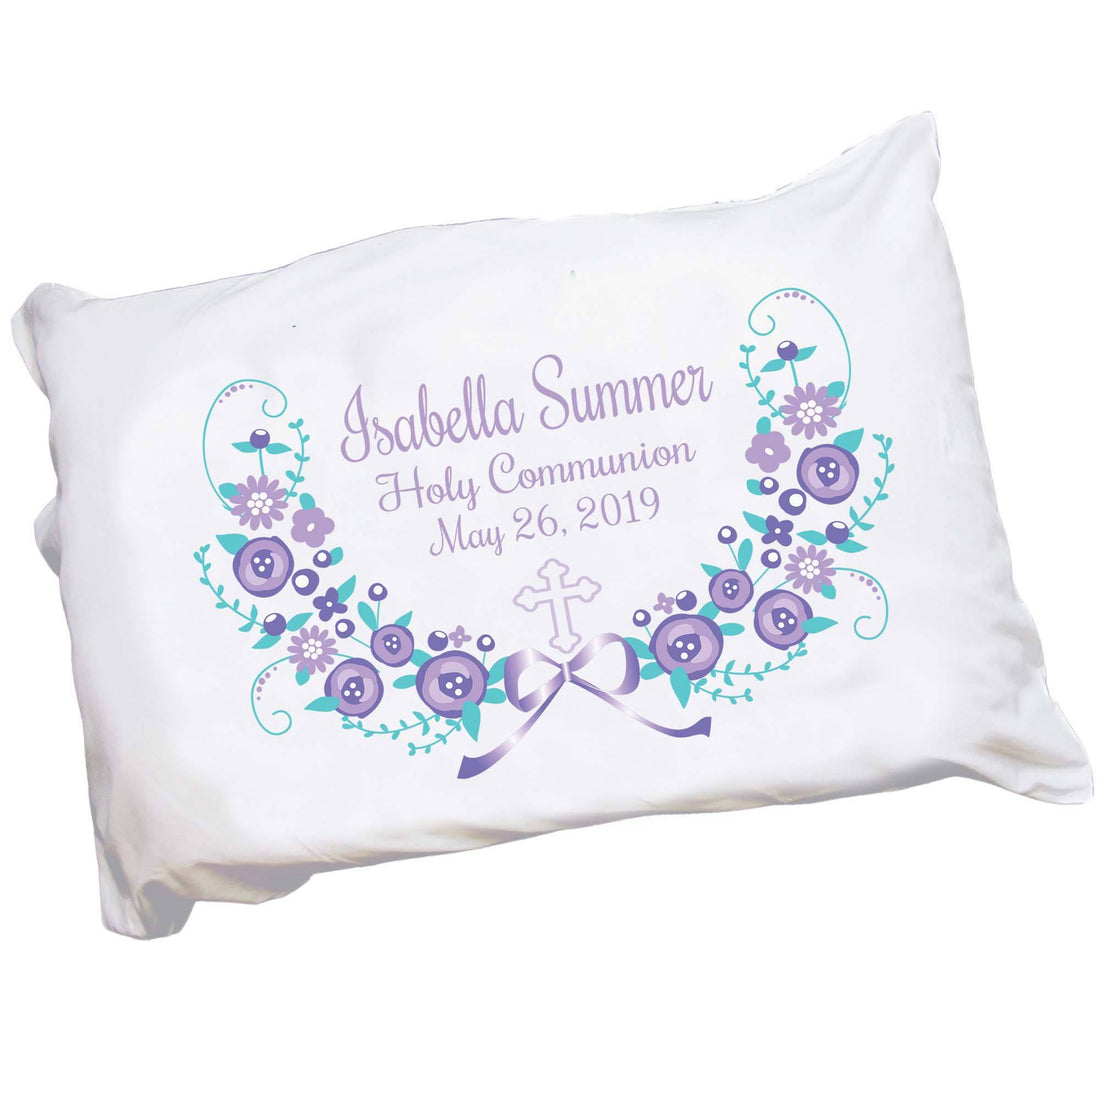 Personalized Childrens Pillowcase with Lavender Floral Garland Cross Design